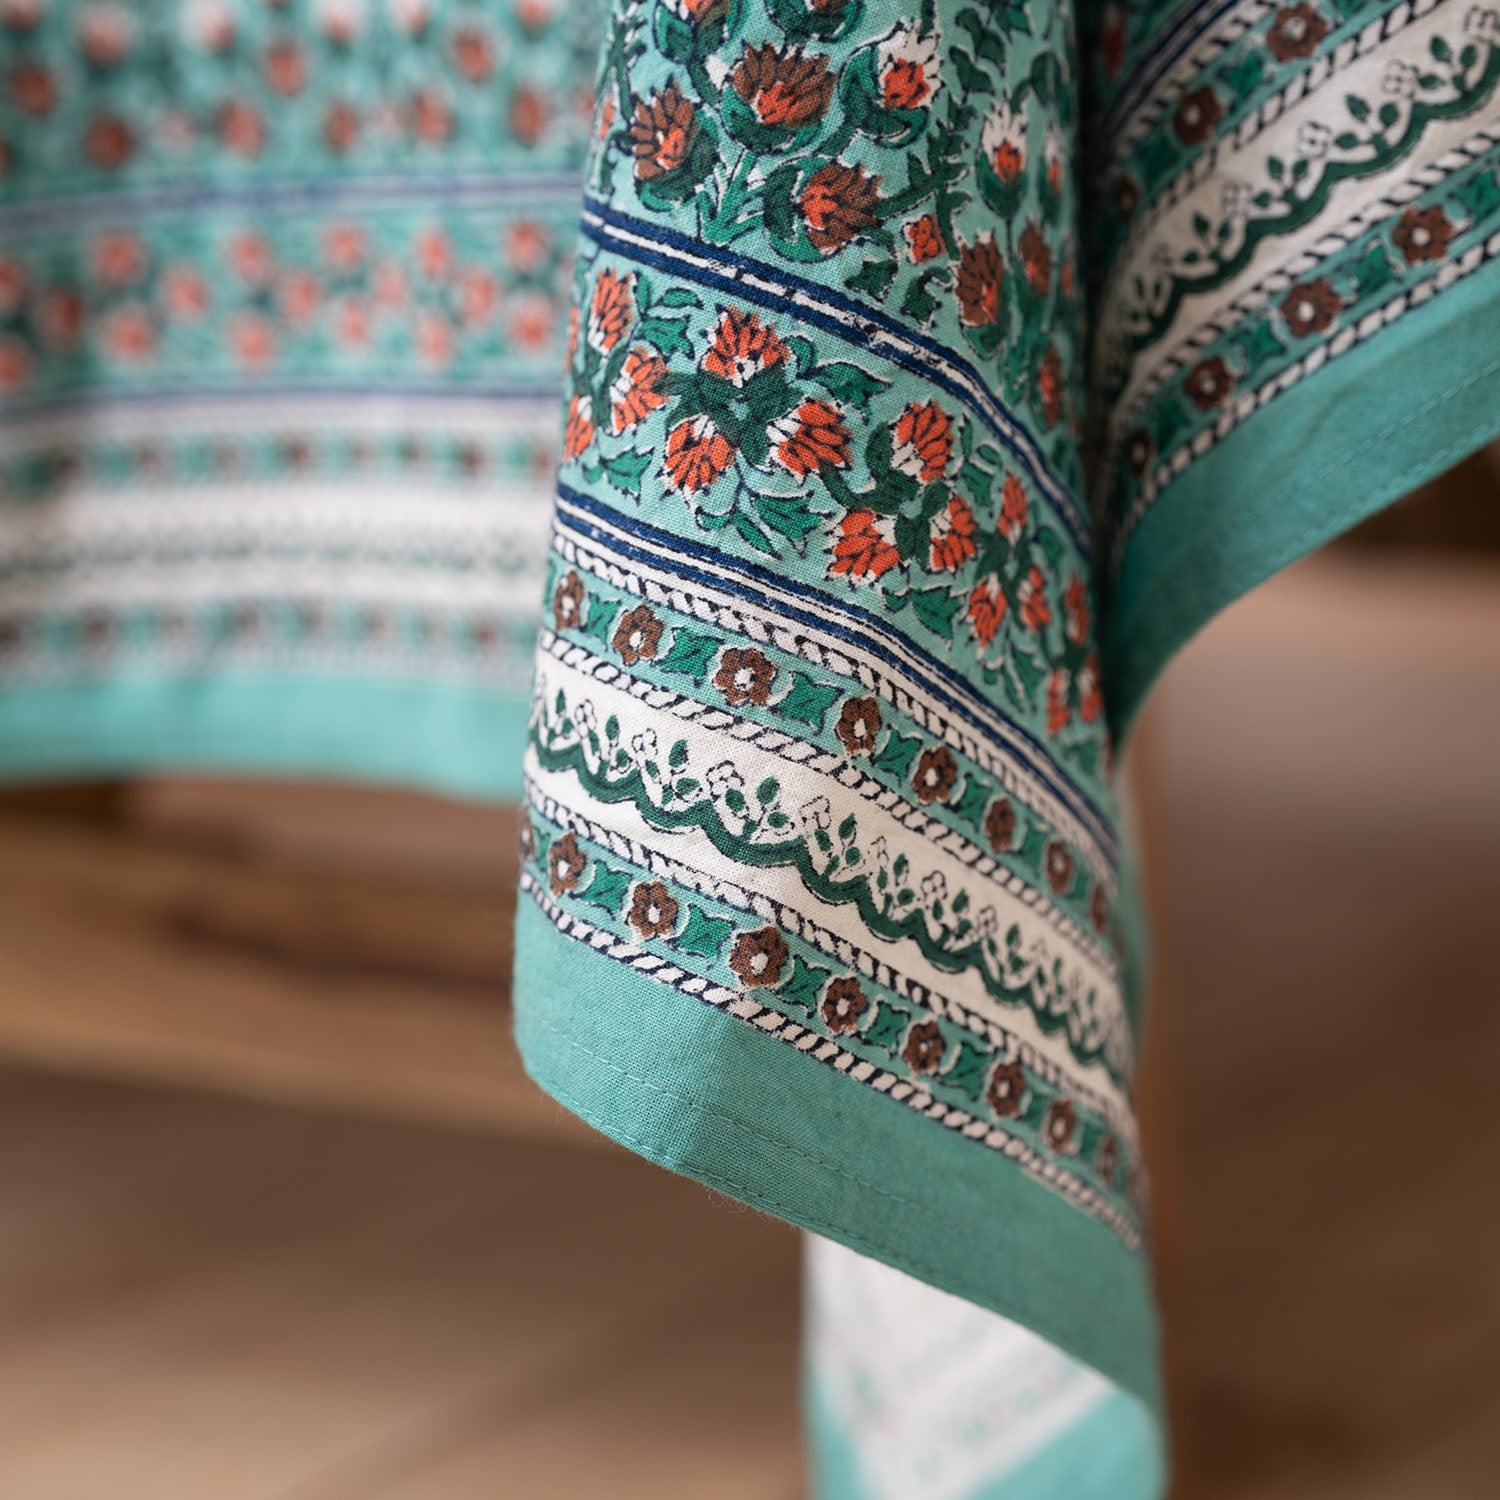 Tischdecke Indian Flowers Turquoise Red